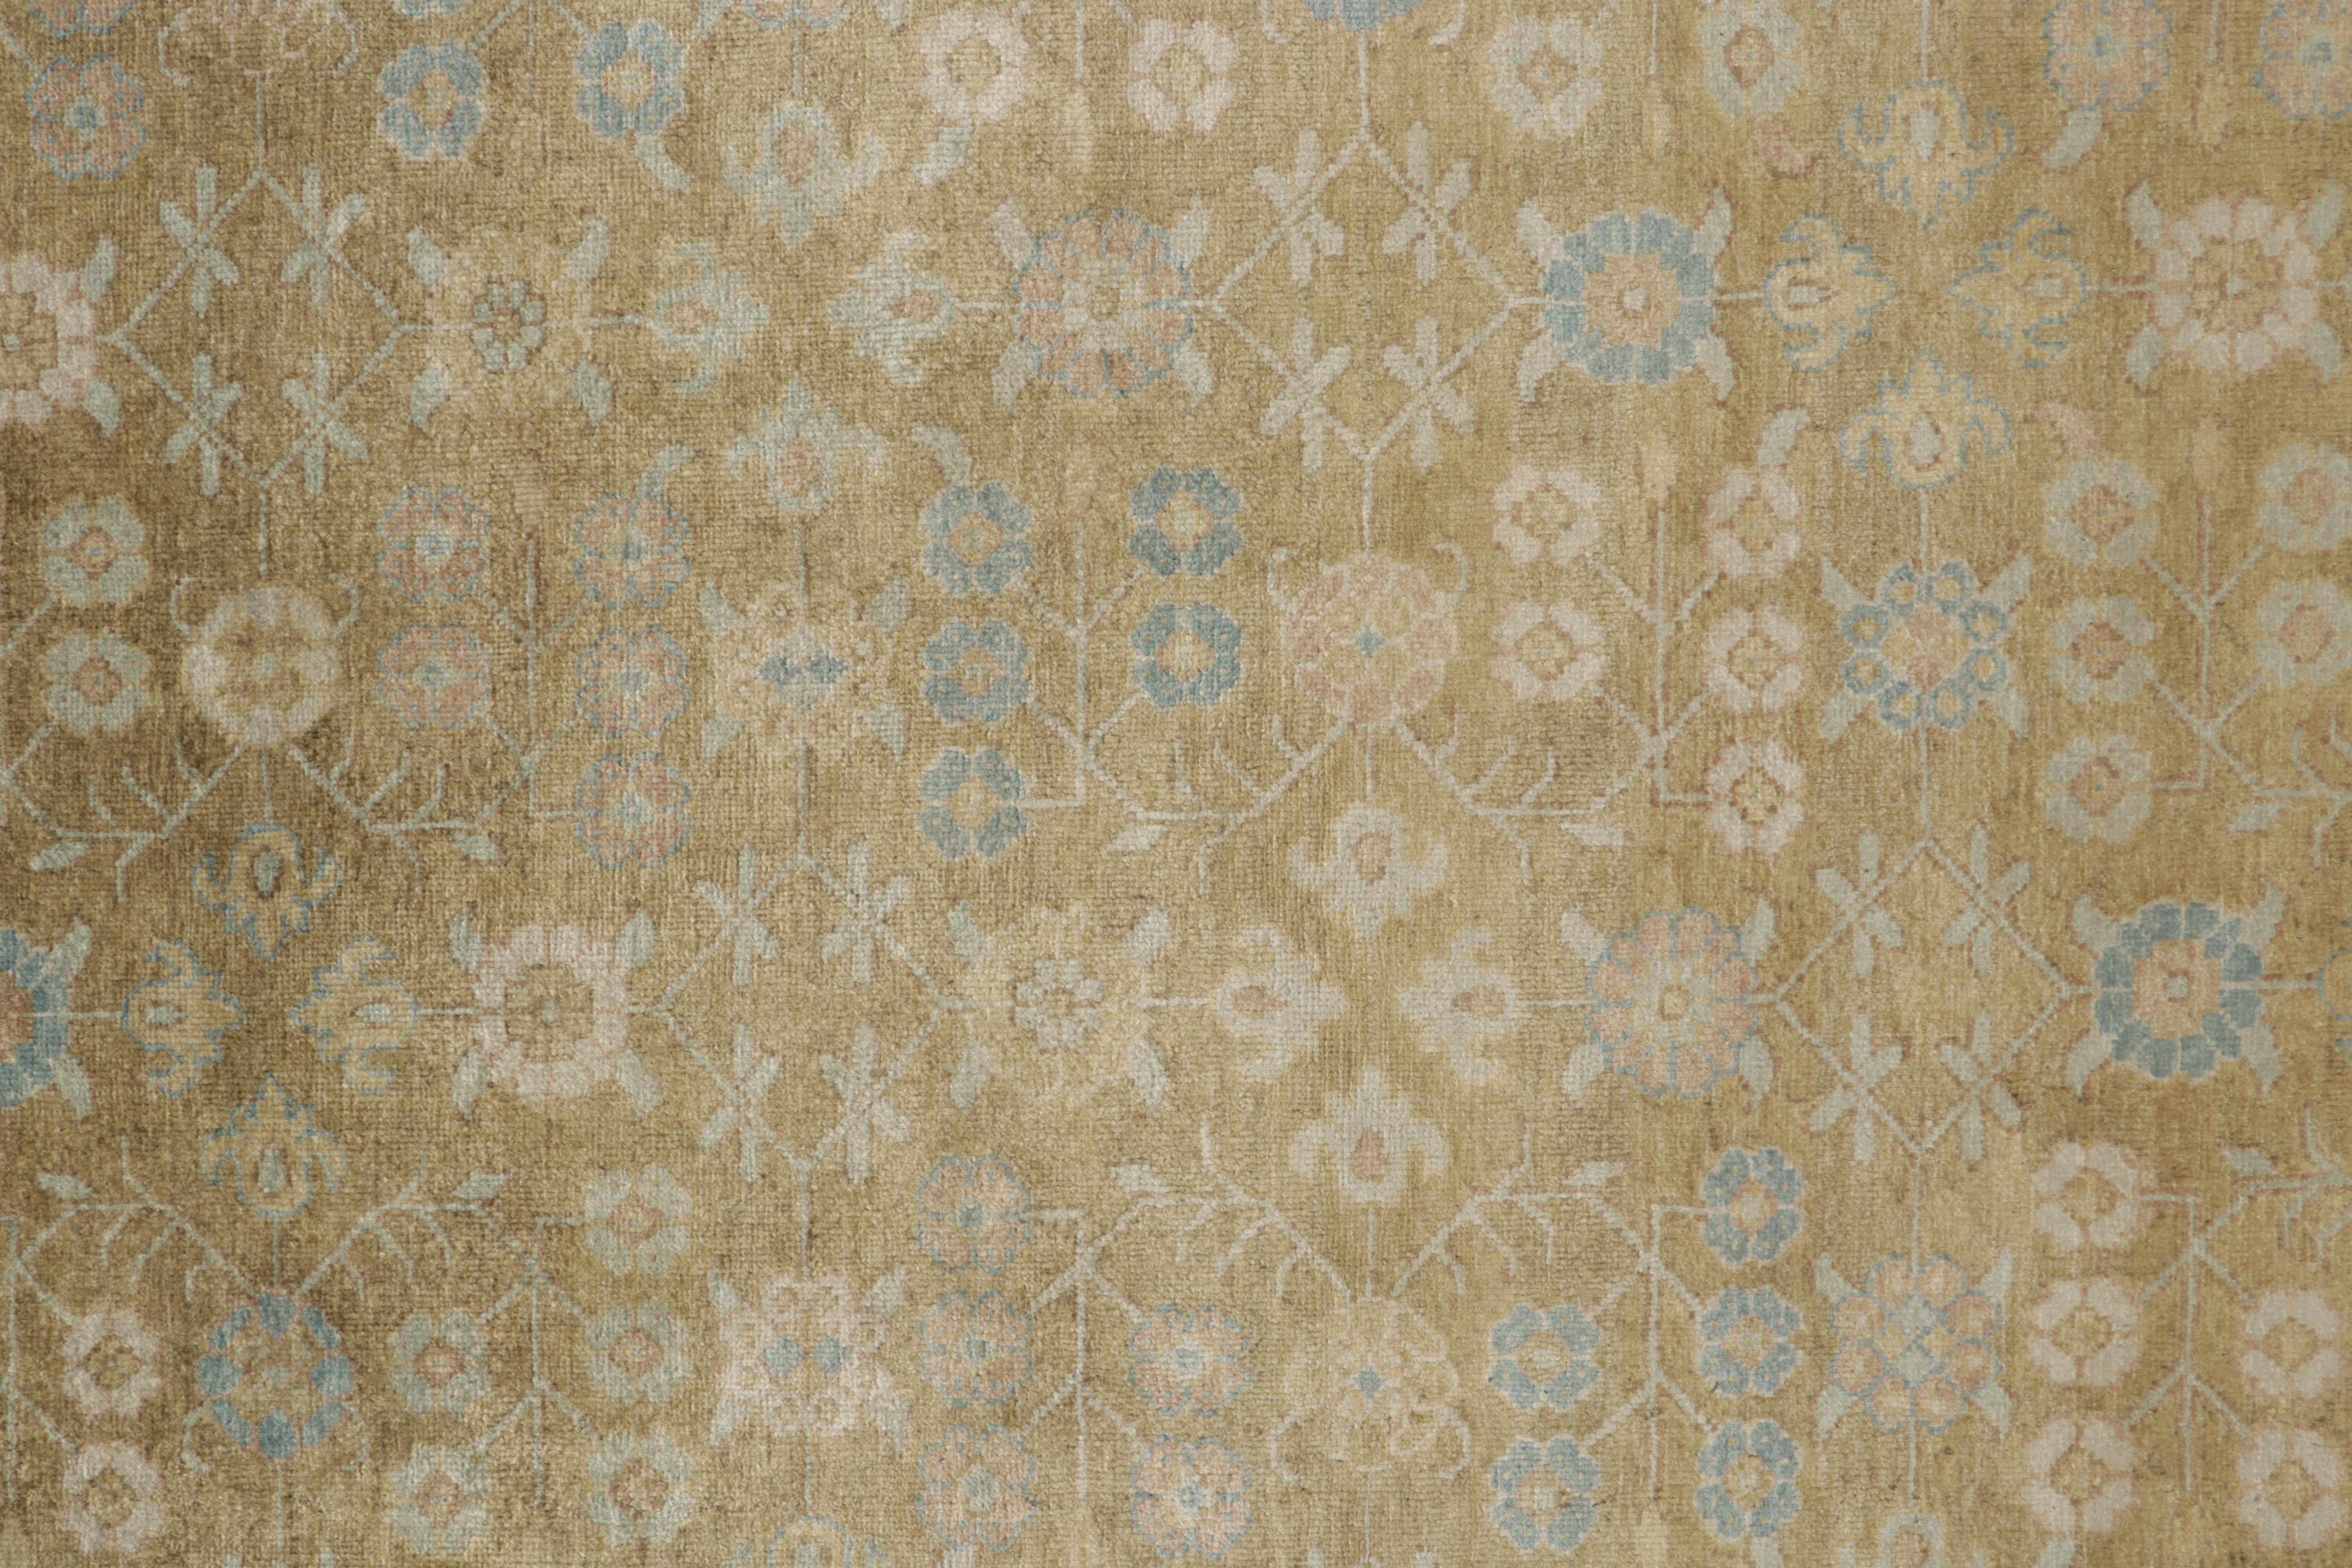 Contemporary Rug & Kilim’s Khotan style rug in Gold, Beige-Brown and Blue Patterns For Sale